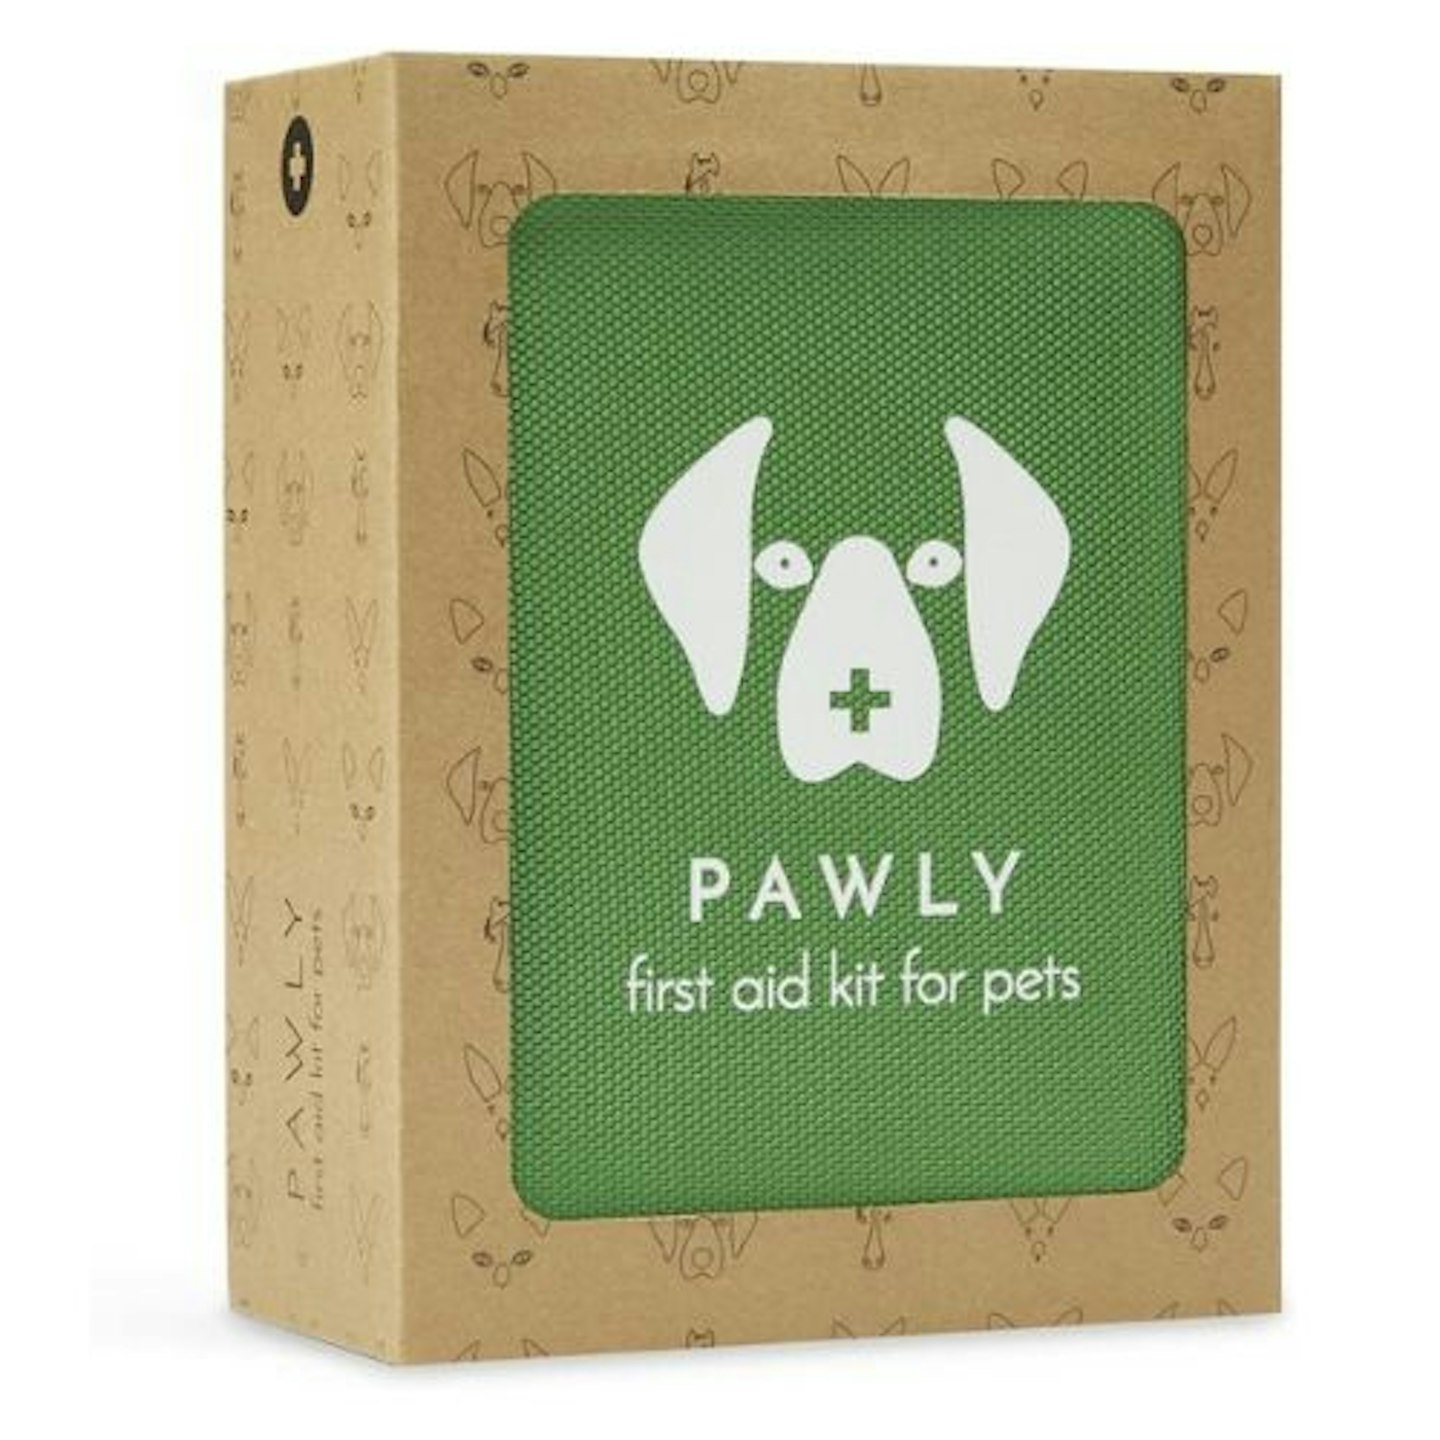 Pawly Pet First Aid Kit - Includes Over 40 Premium Items - Tick Remover, Syringe, Vet Wrap, Bandages, Wipes and Lancets